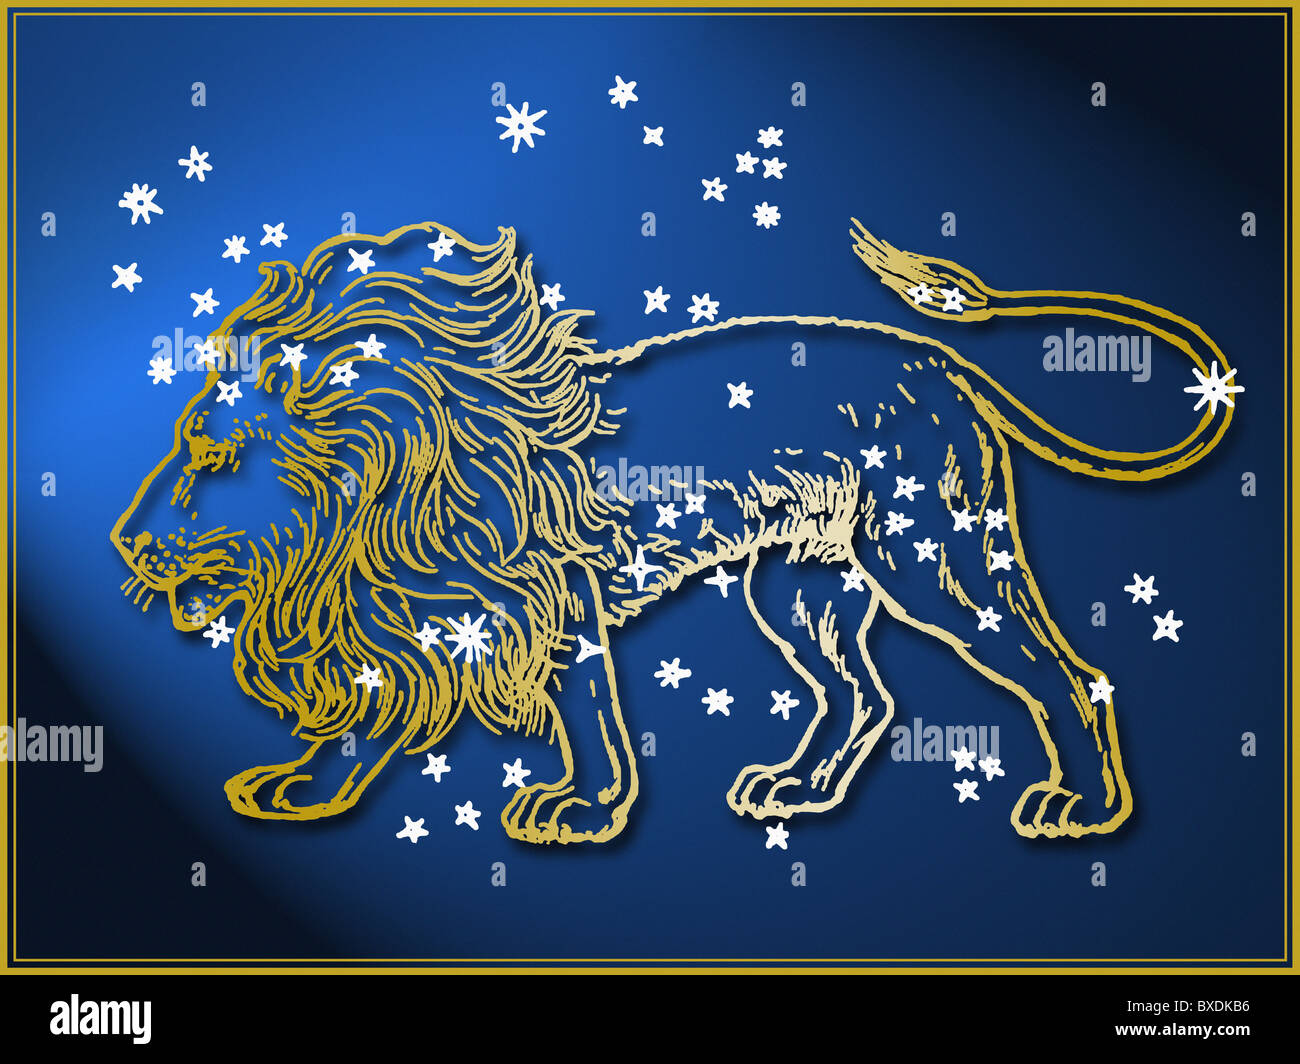 Leo astrological sign Stock Photo